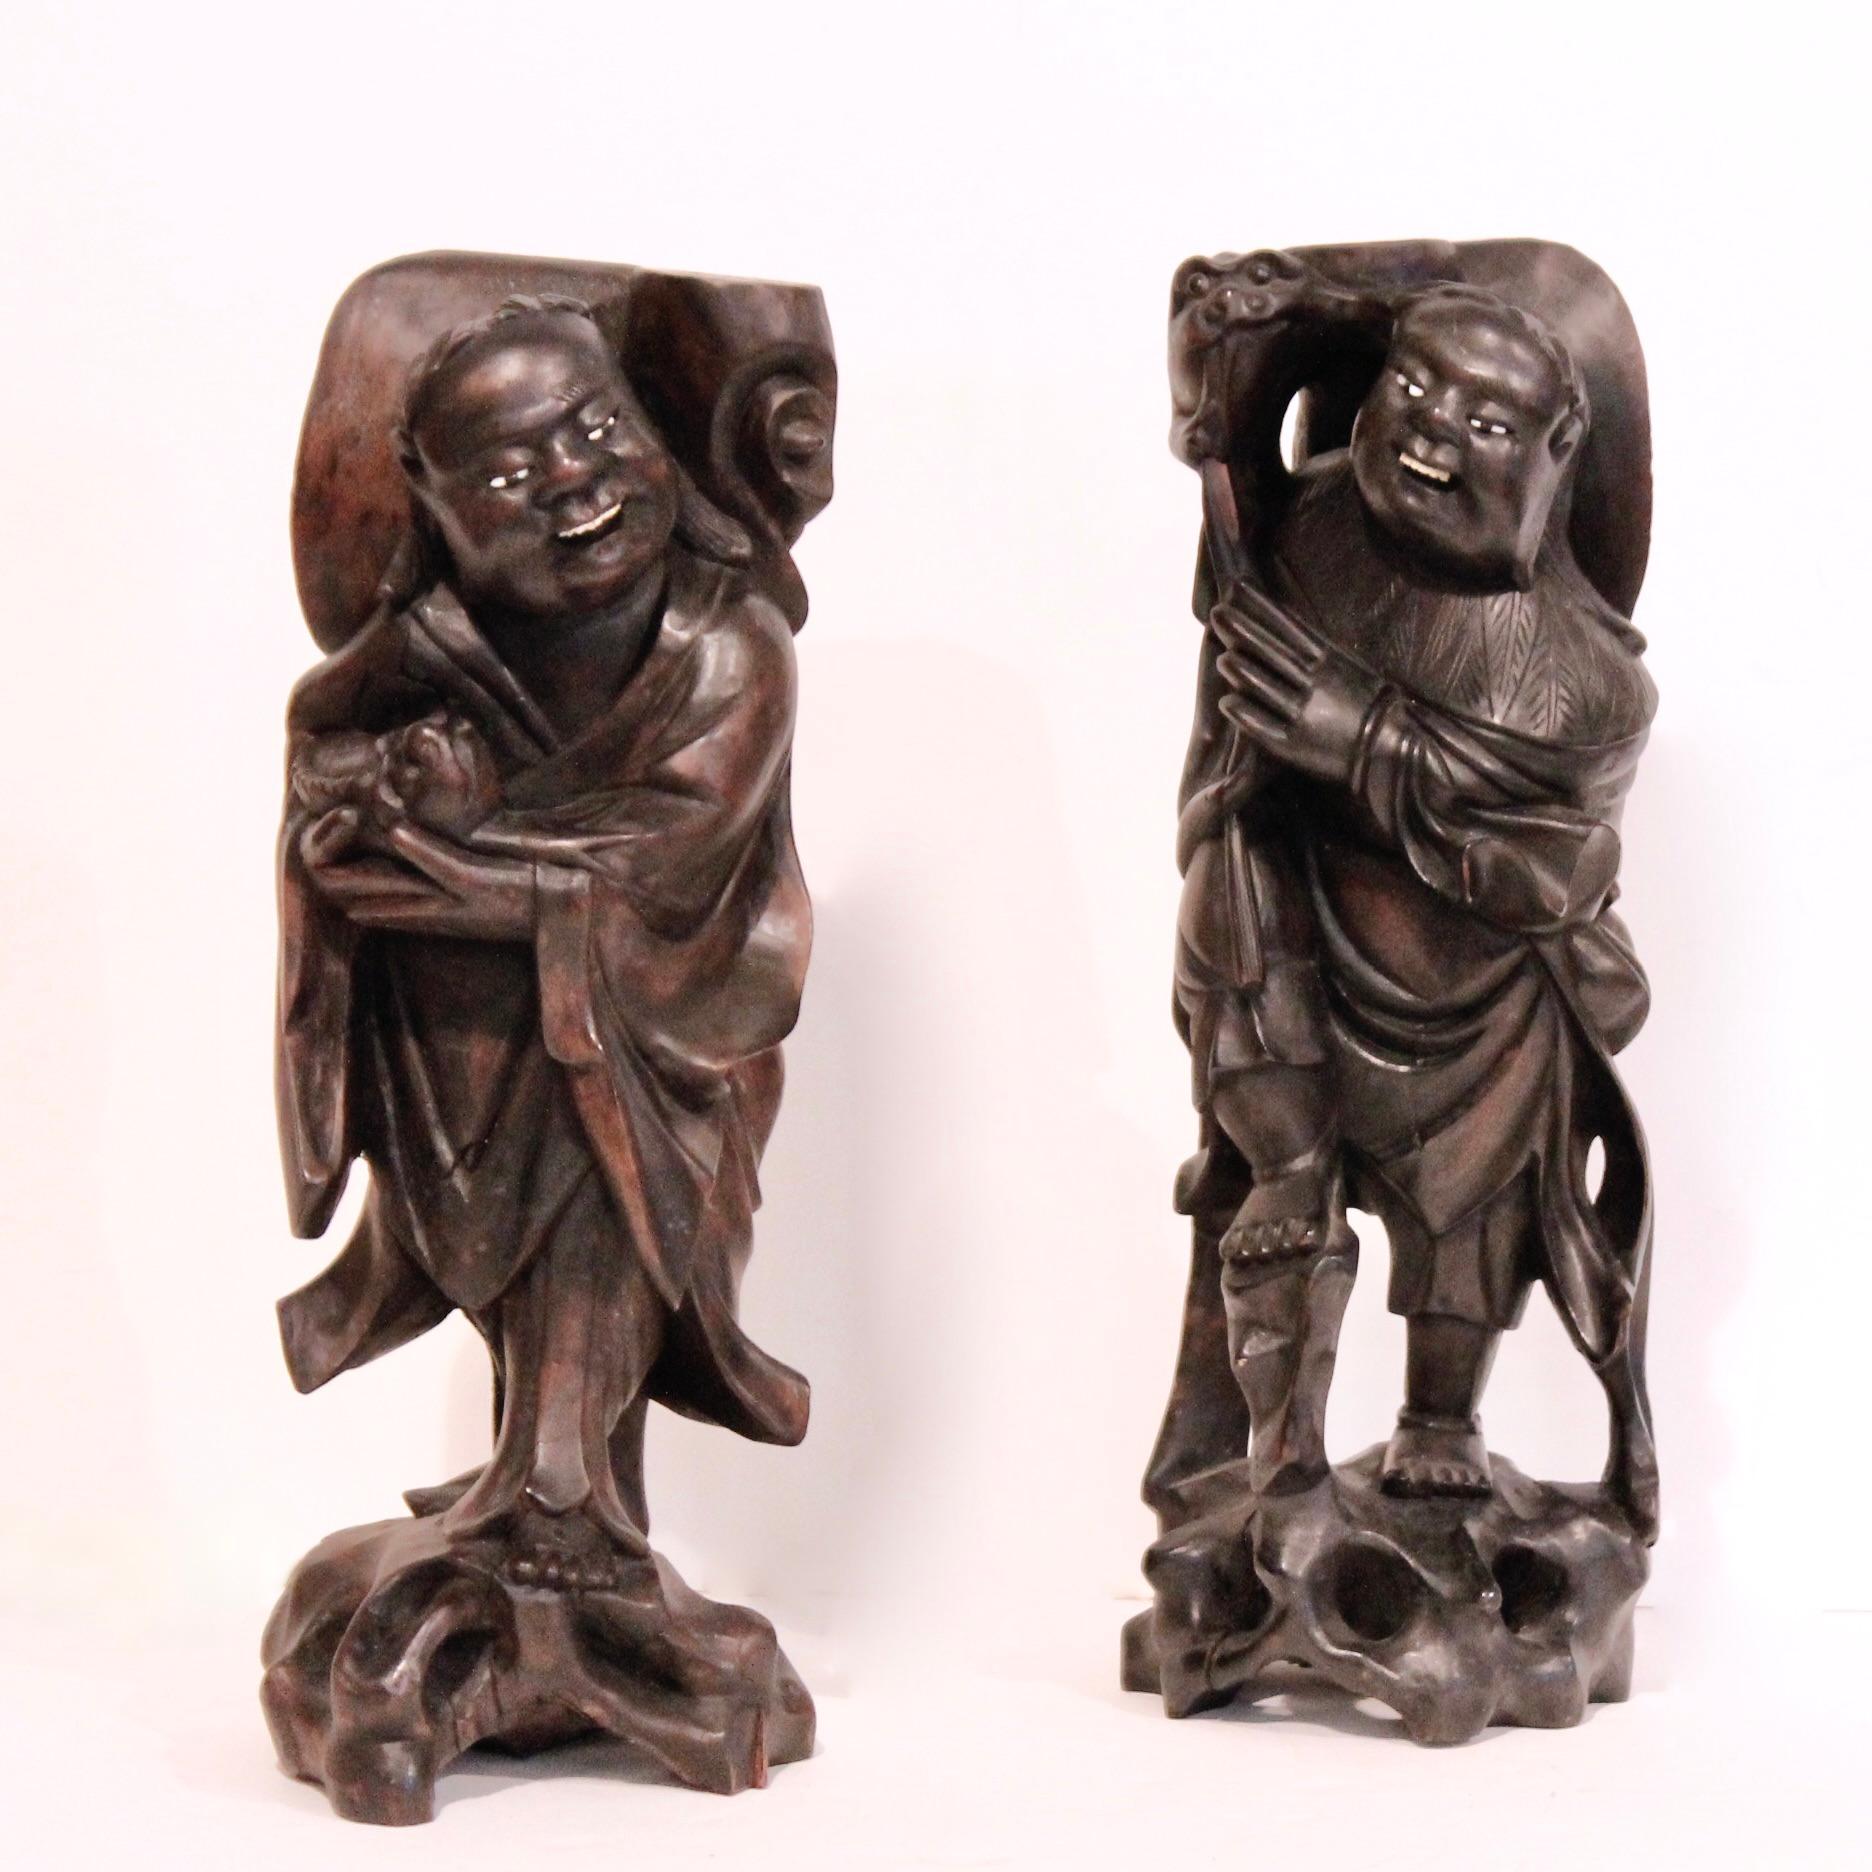 An unusual pair of  sculptural candle or joss stick holders- a pair of jolly grinning men holding up smiling fish and standing on stylized rockery bases carved of a piece with the rest. Each figure is carved in three dimensions. The backs, while